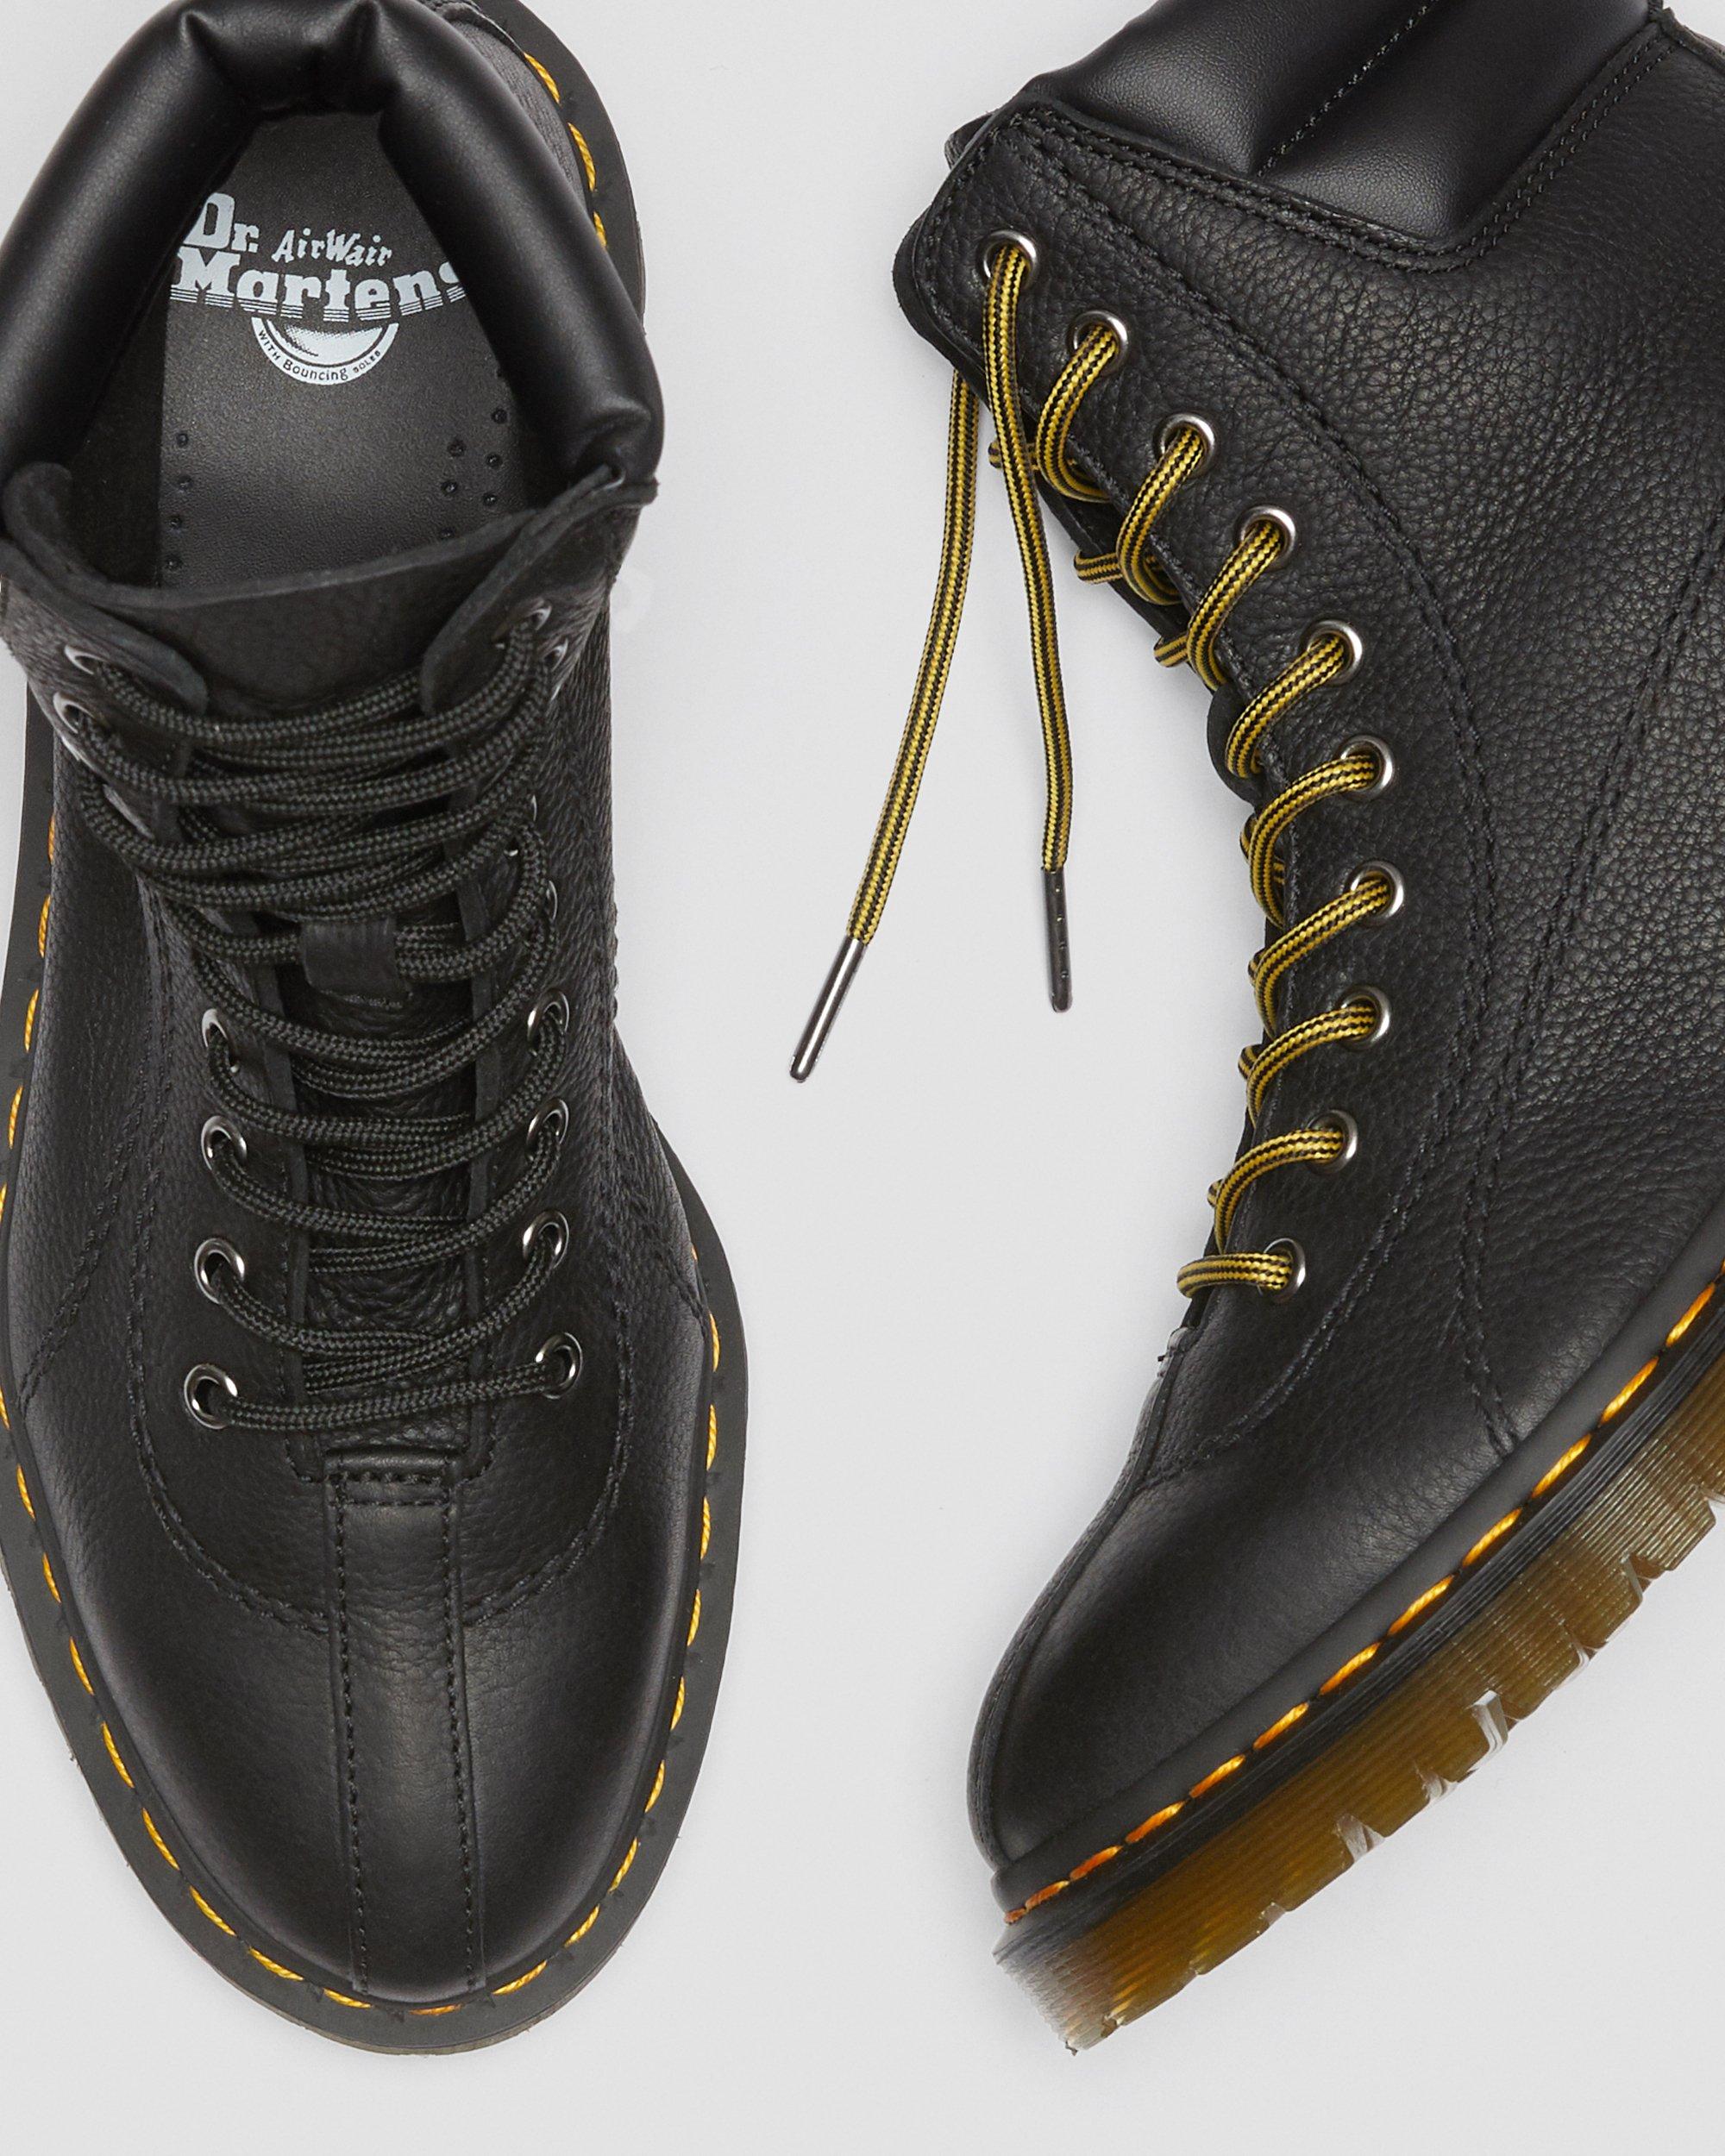 SANTO LEATHER PADDED COLLAR BOOTS | Dr. Martens